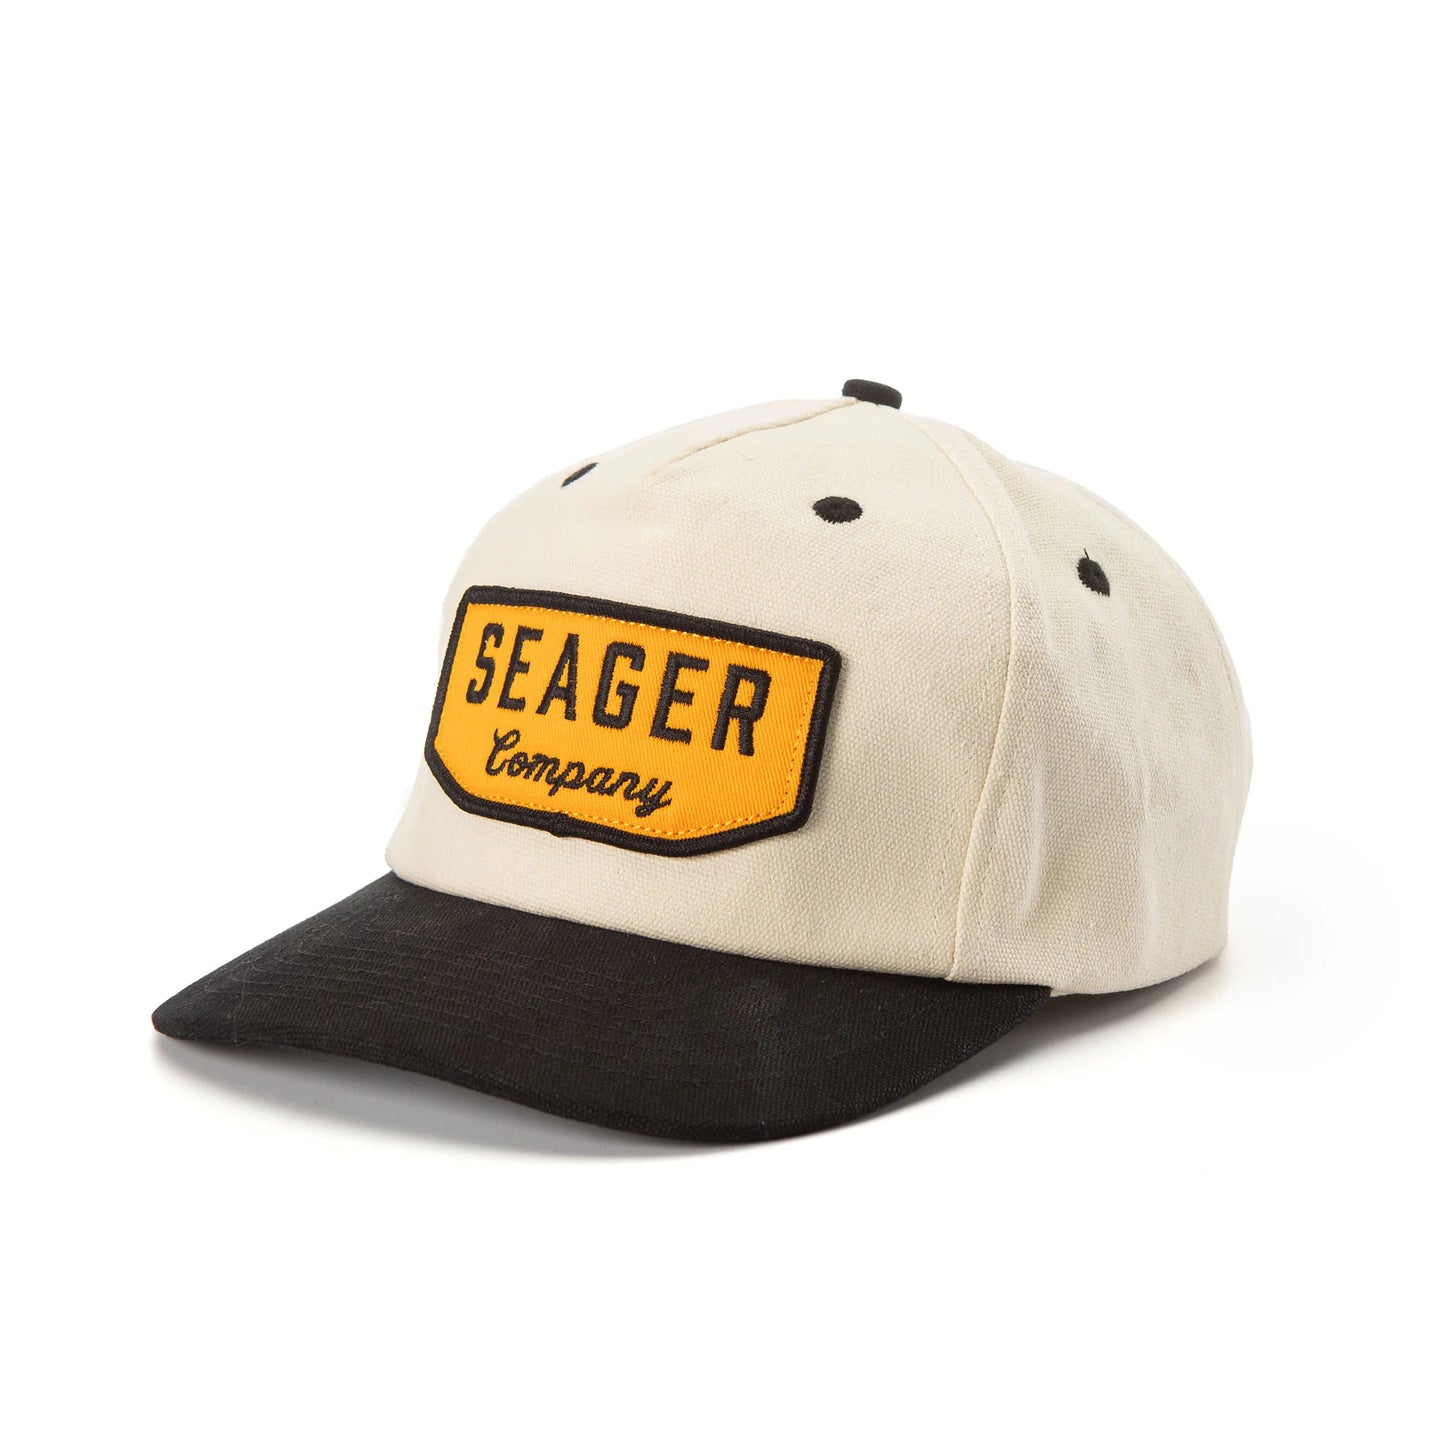 Seager's Wilson Snapback hat in Black and White